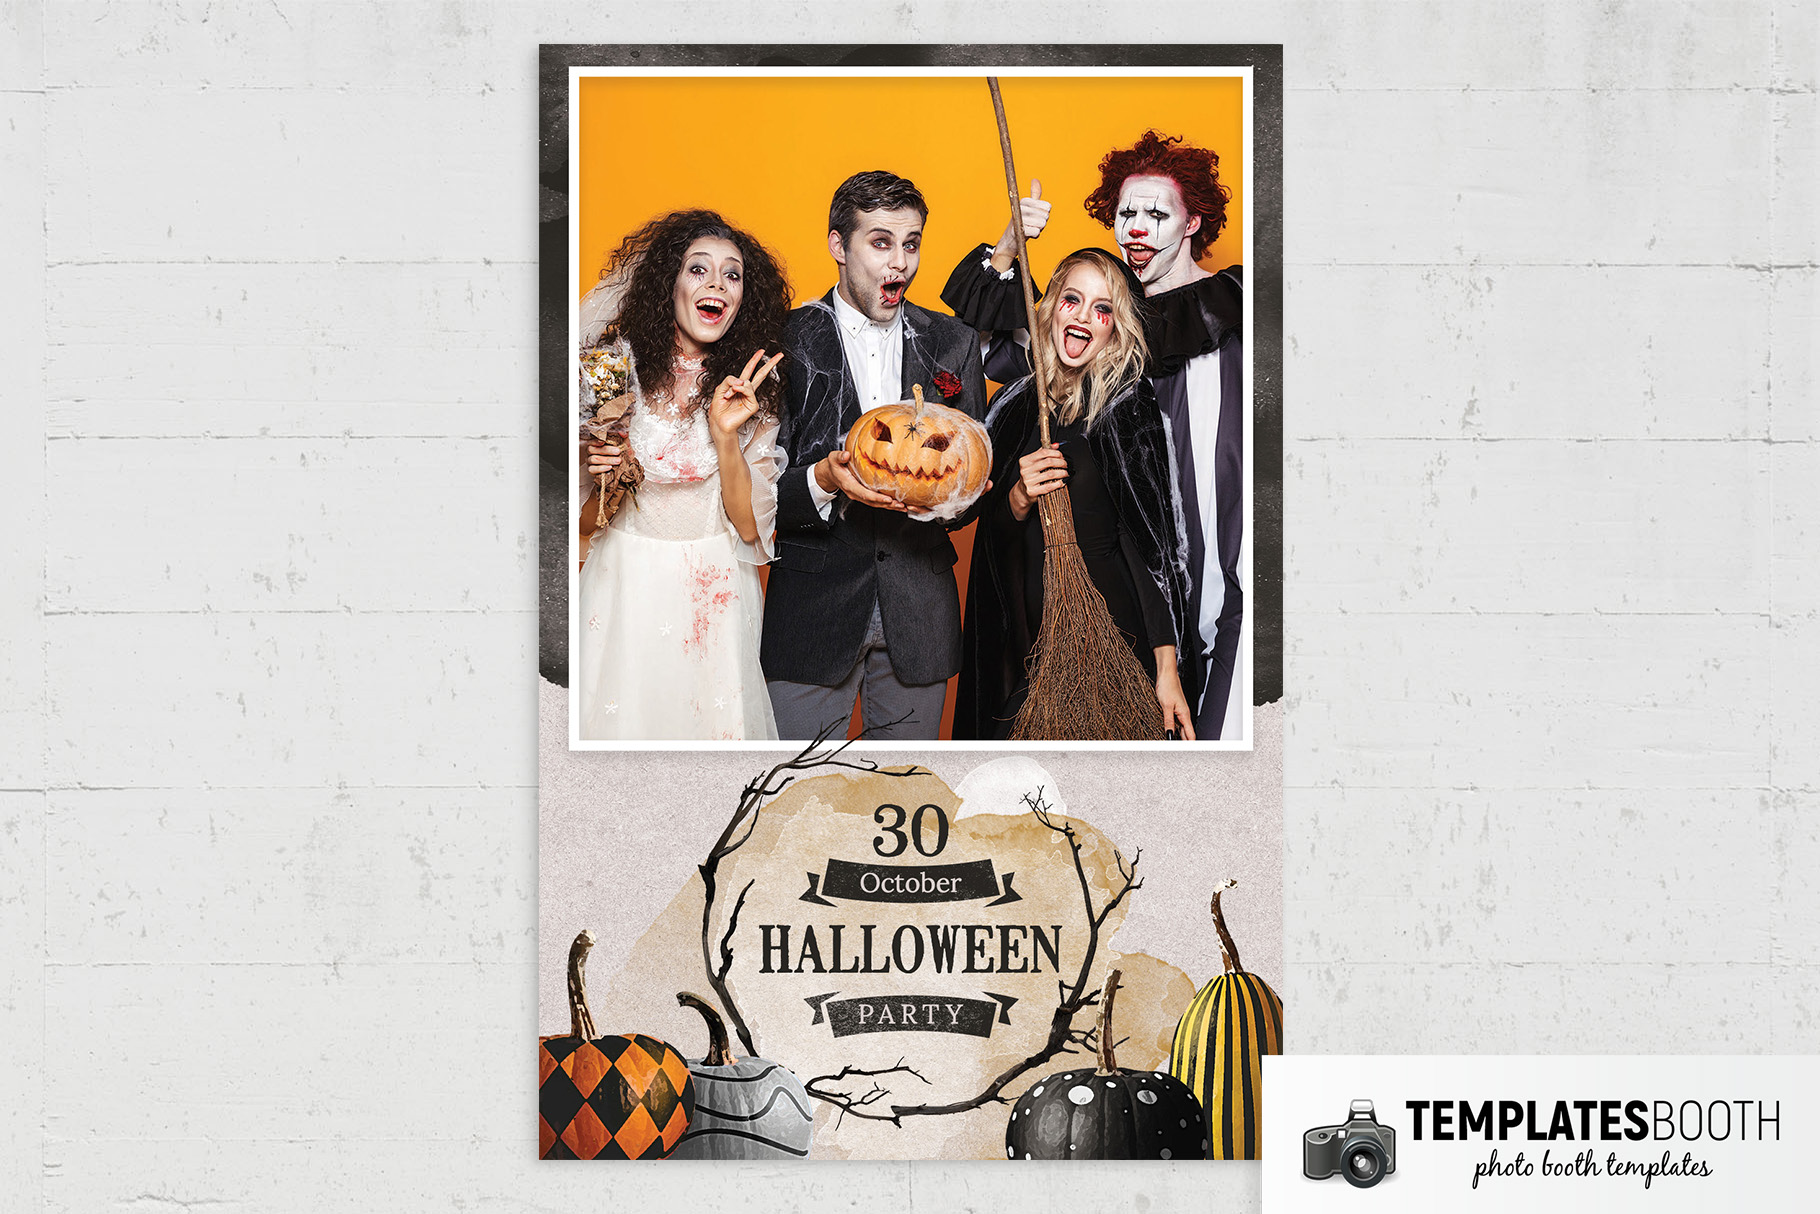 Rustic Halloween Photo Booth Template